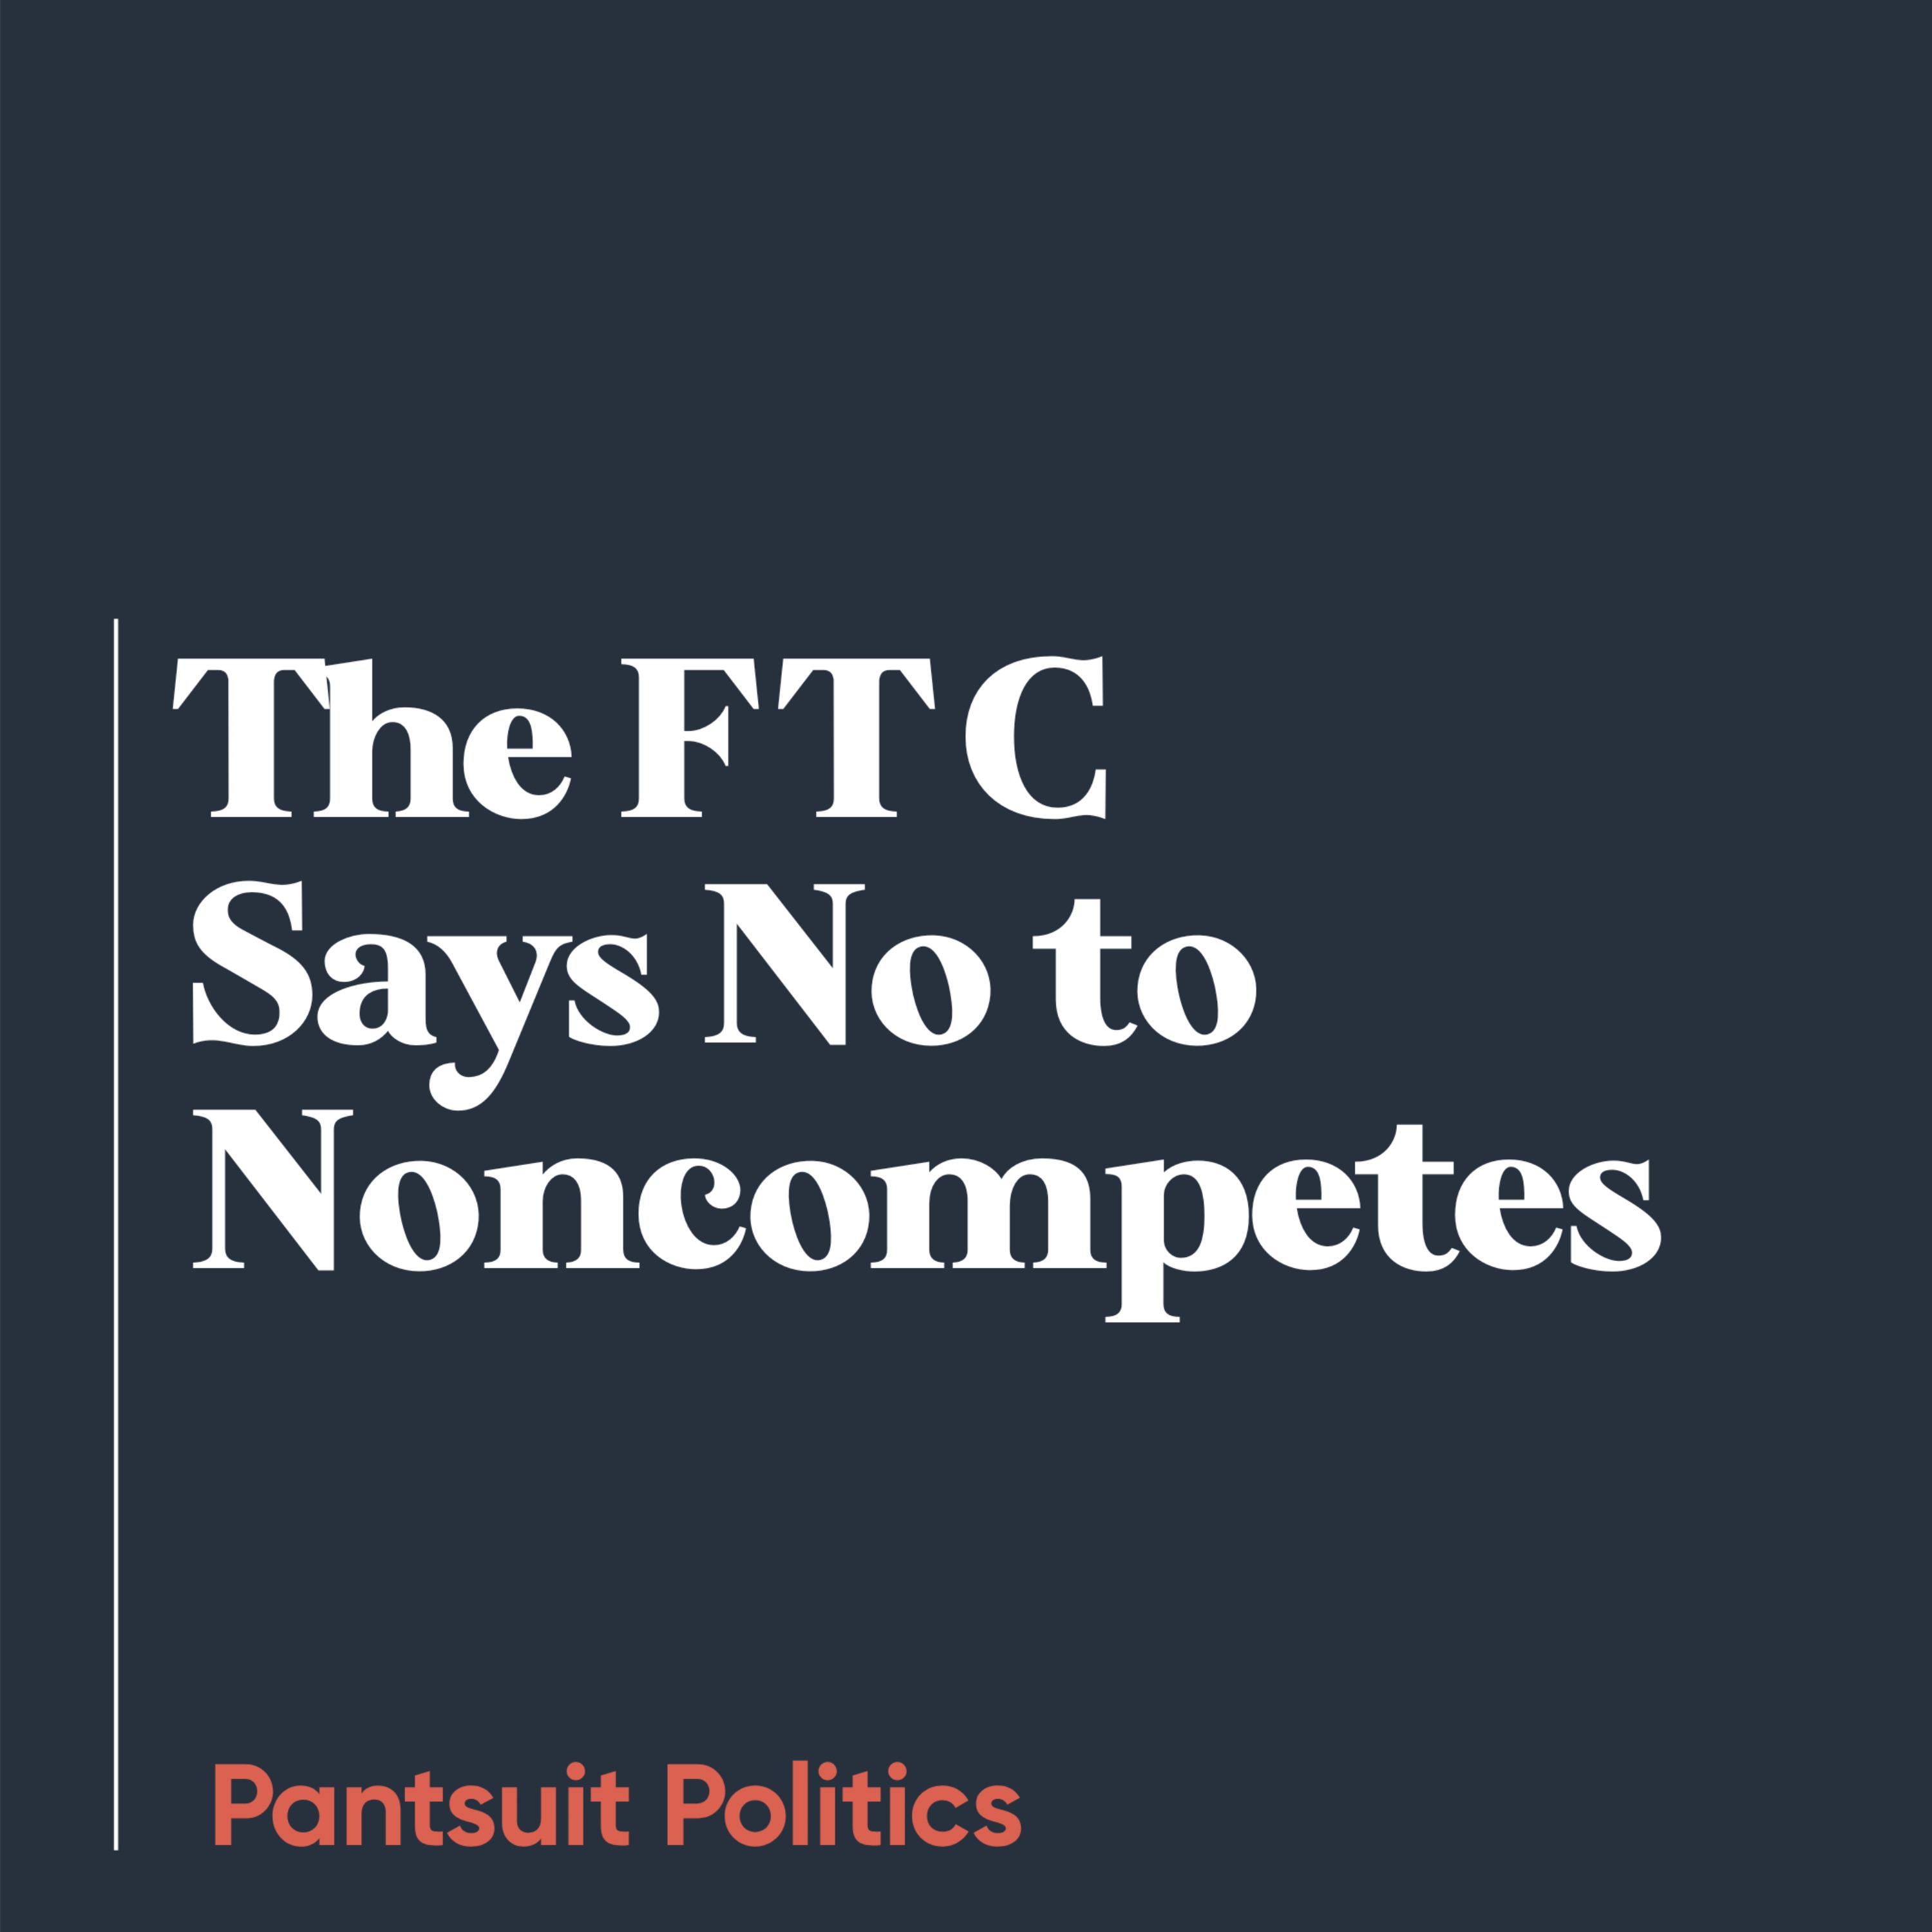 The FTC Says No to Noncompetes